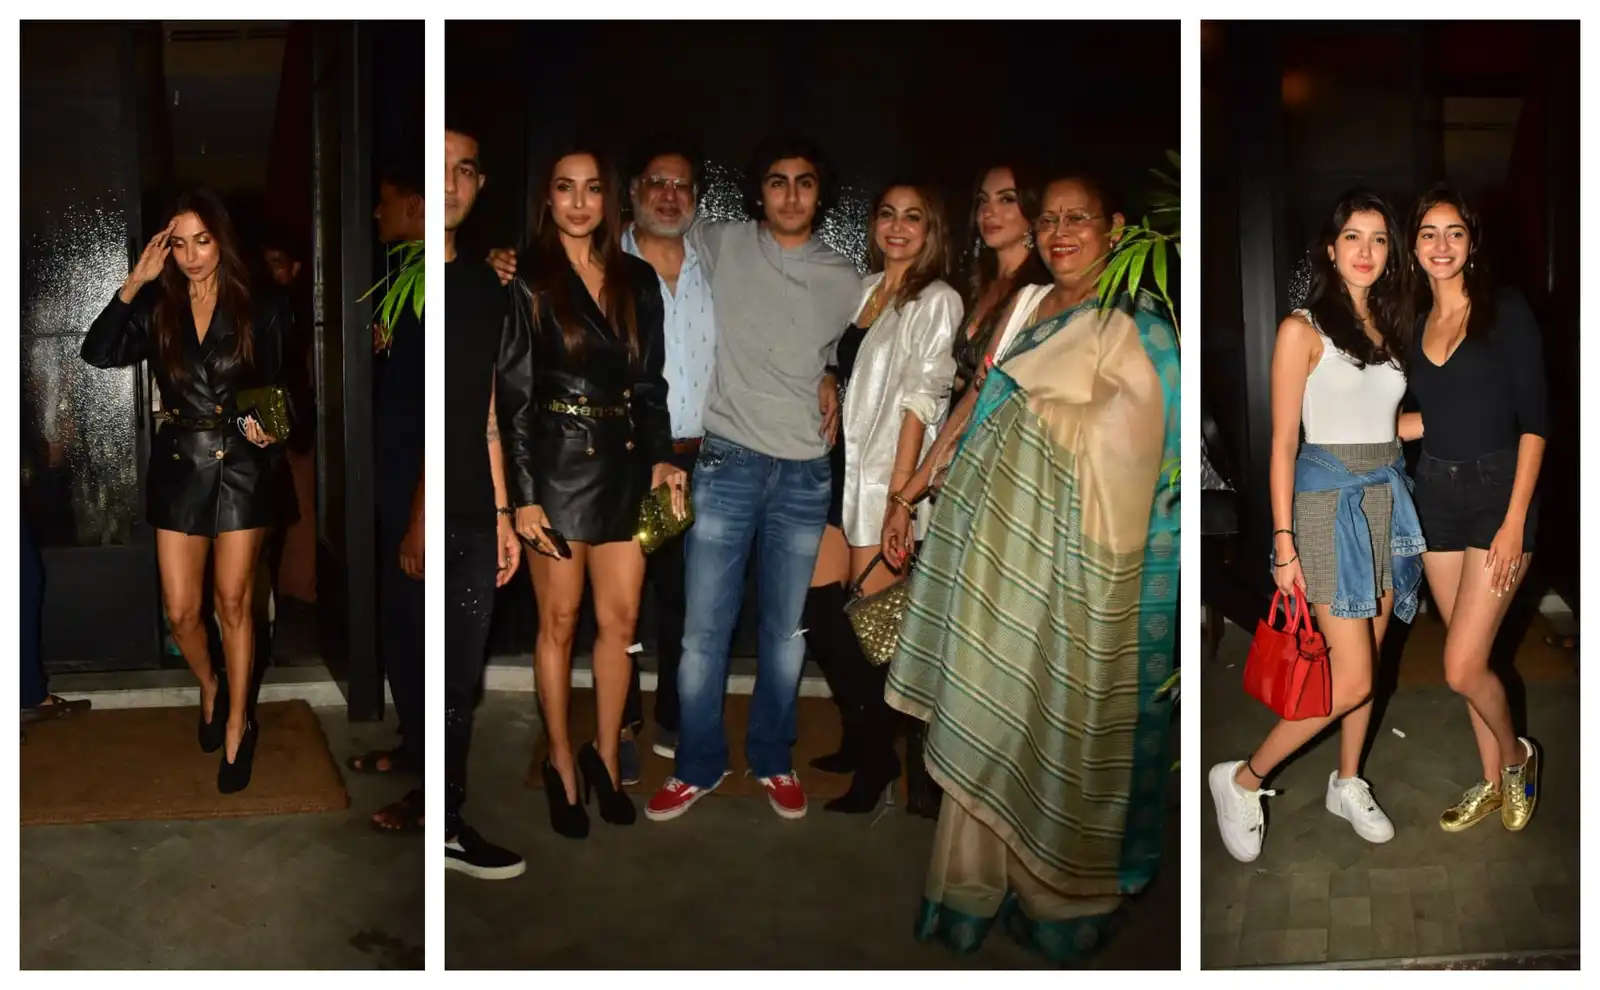 Malaika Arora And Arbaaz Khan Come Together For Son Arhaan Khan’s 17th Birthday, Ananya Pandey, Shanaya Kapoor And Others Join In